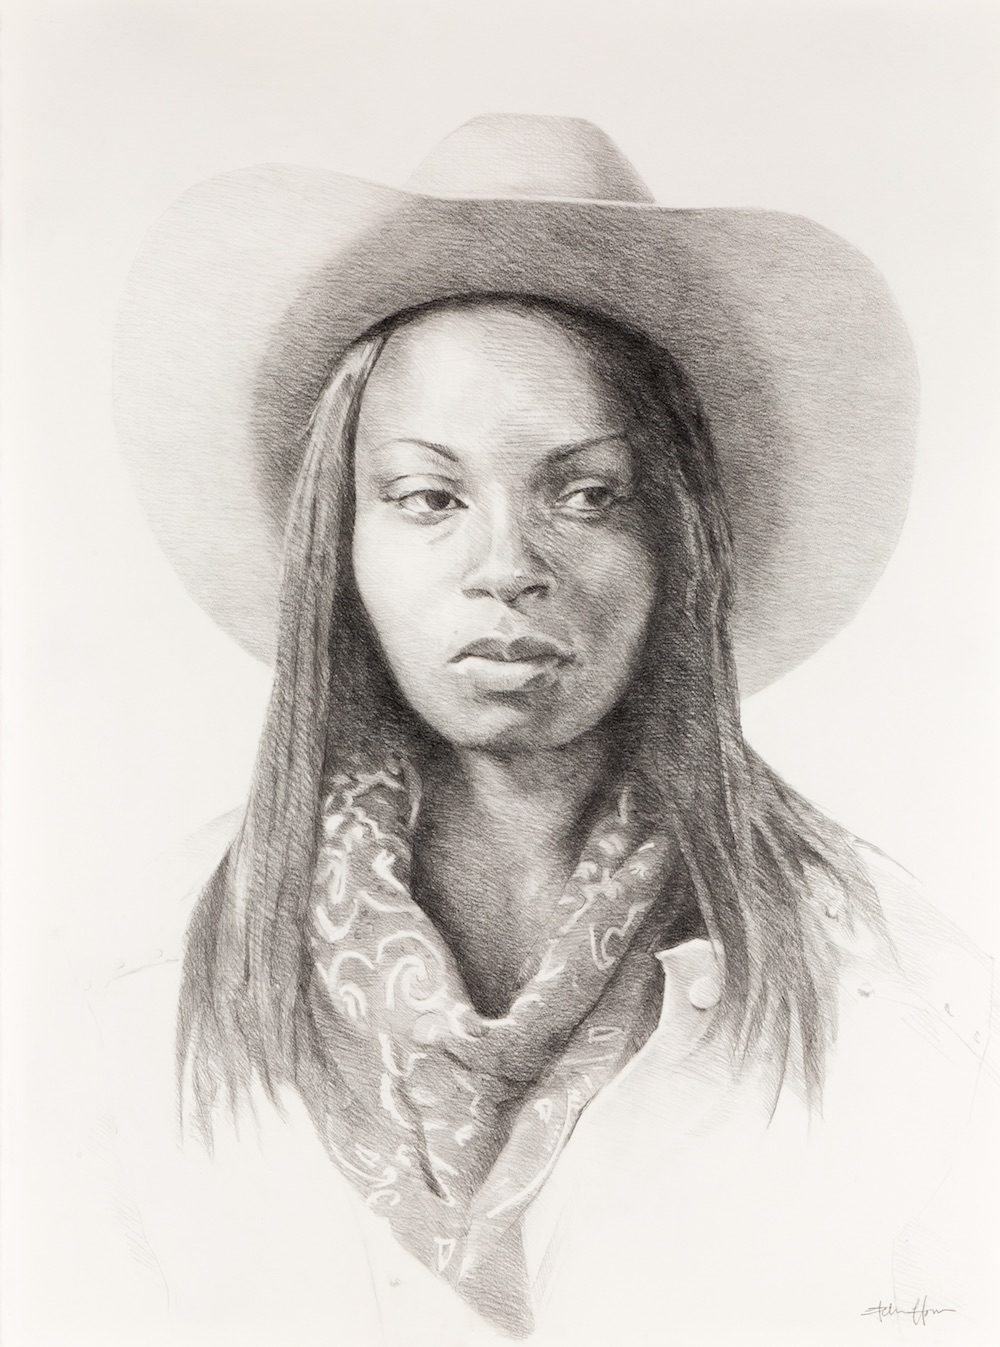 A detailed drawing of a woman as a cowboy, in typical hat and neckerchief.